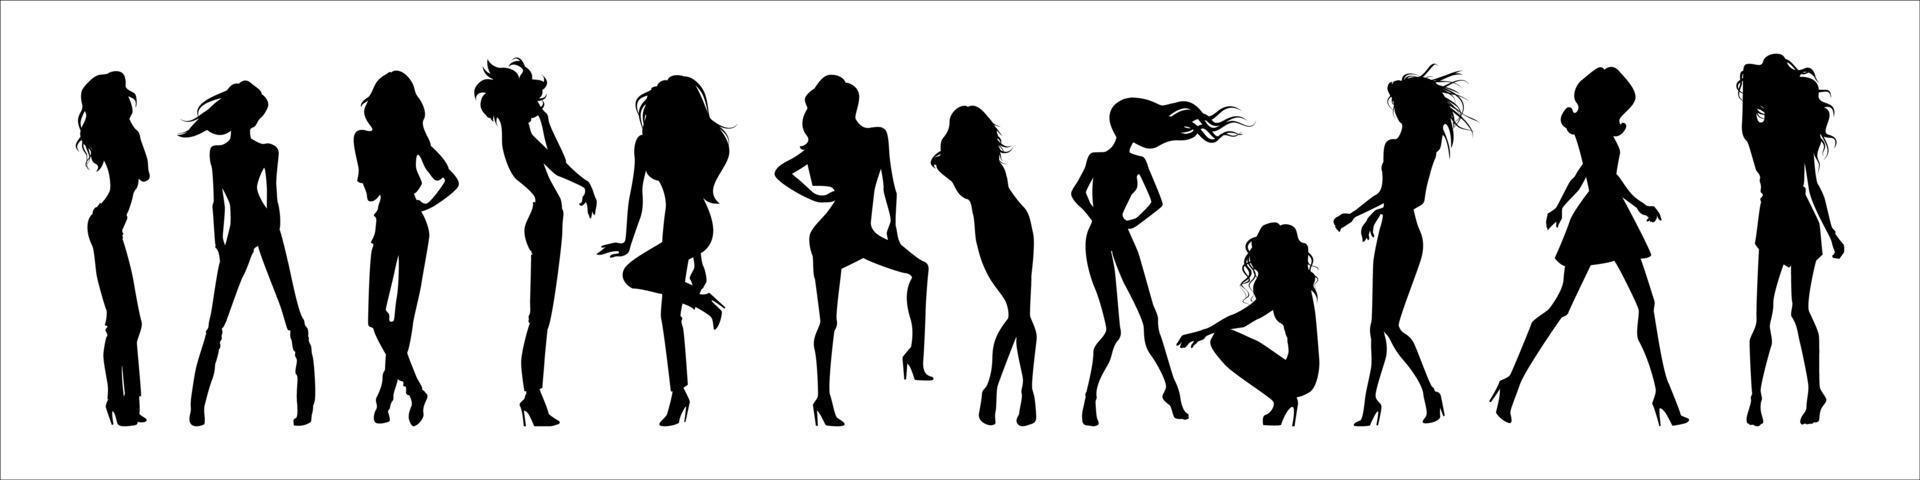 High Quality Women Silhouettes vector